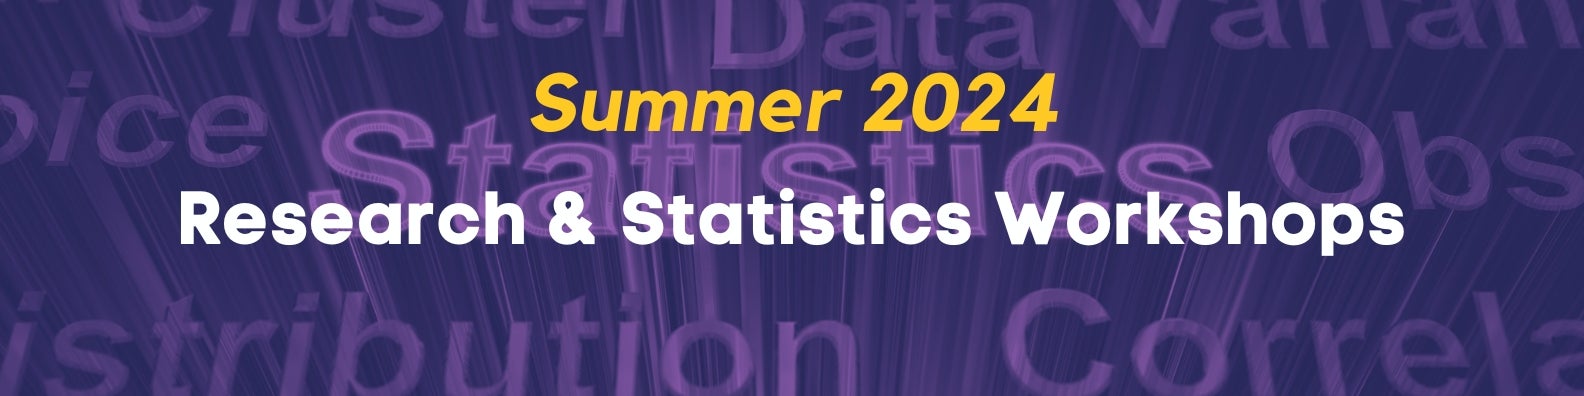 Summer 2024 Research and Statistics Workshops